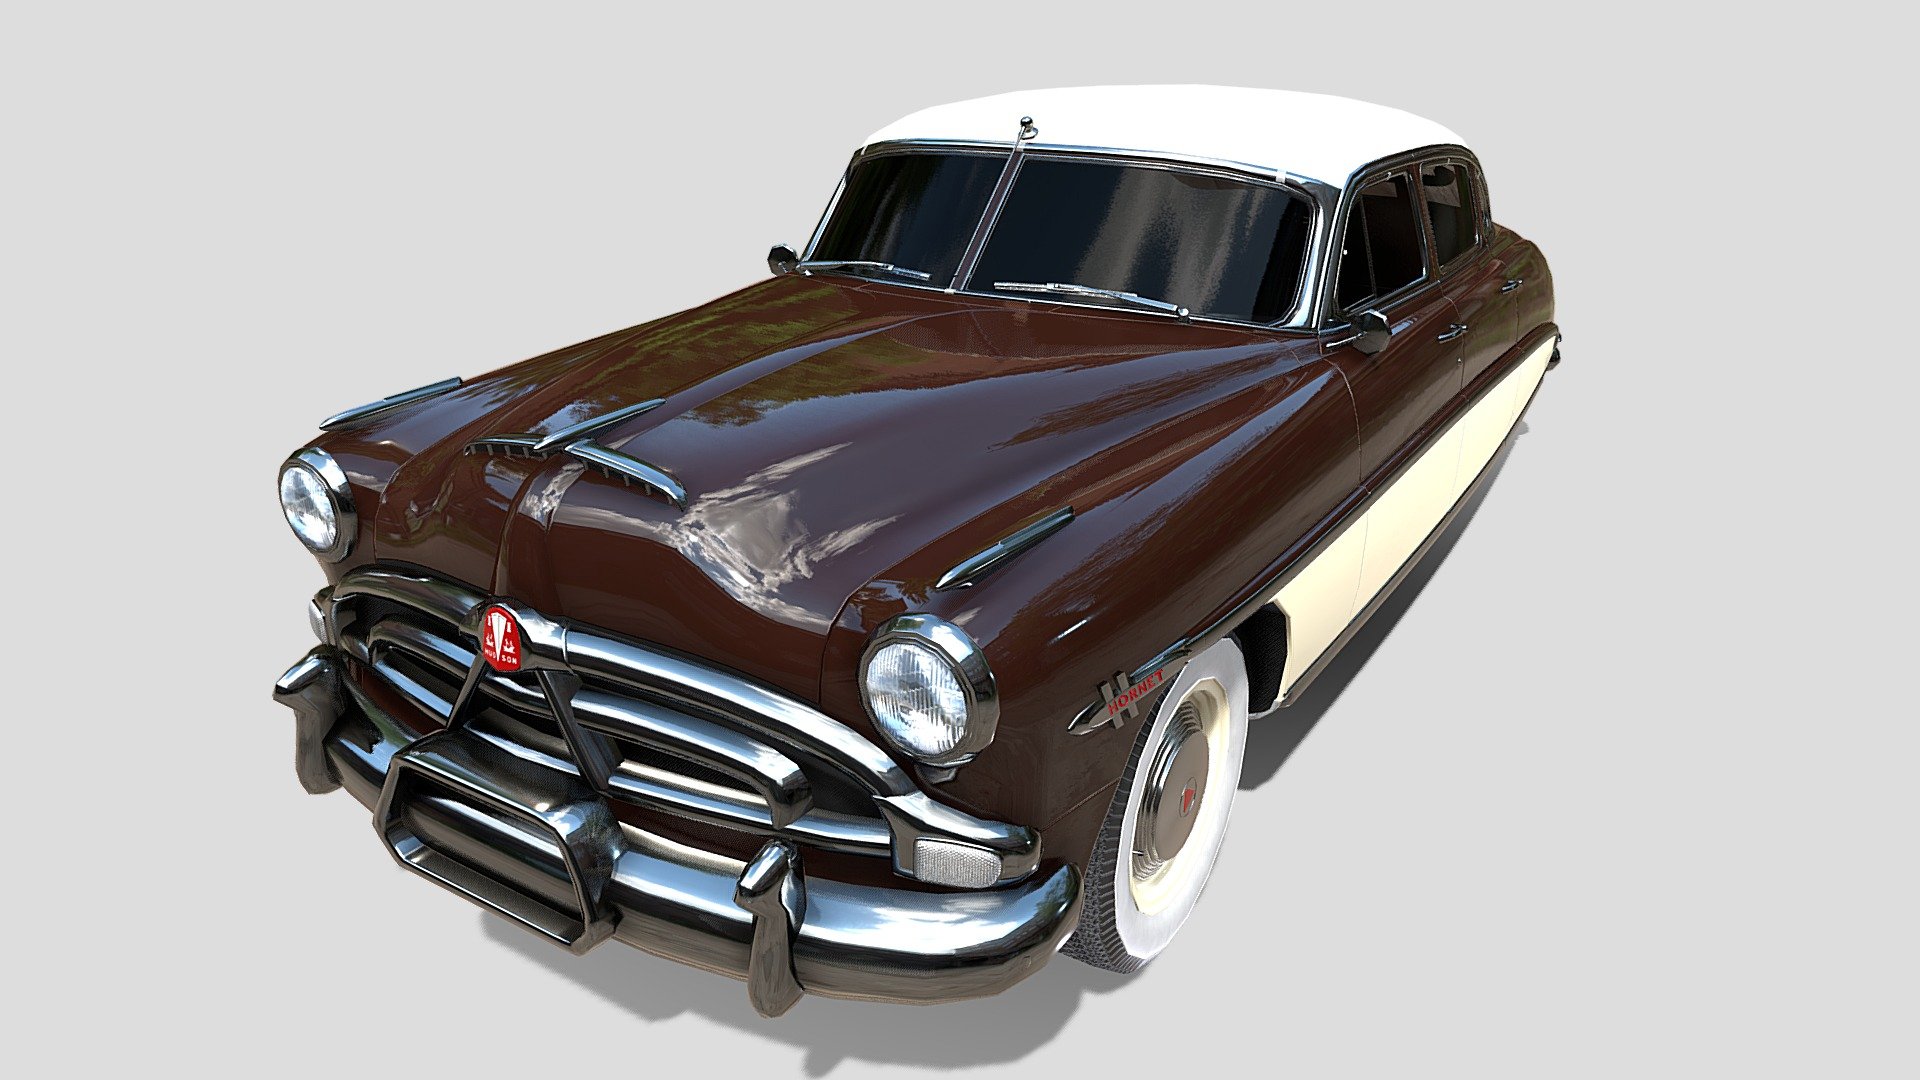 4 Door Hudson Hornet detailed 3d model, rendered with Cycles in Blender, using PBR textures, as per seen on attached images. 
The 3d model is scaled to original size in Blender.

File formats:
-.blend, rendered with cycles, as seen in the images;
-.obj, with materials applied;
-.dae, with materials applied;
-.fbx, with materials applied;
-.stl;

Files come named appropriately and split by file format.

3D Software:
The 3D model was originally created in Blender 3.1 and rendered with Cycles.

Materials and textures:
The models have materials applied in all formats, and are ready to import and render.
Materials are image based using PBR, the model comes with two materials, with five 4k PBR png image textures each corresponding to:
-exterior;
-wheels;

Don't forget to rate and enjoy! - 4 Door Hudson Hornet v2 - Buy Royalty Free 3D model by dragosburian 3d model